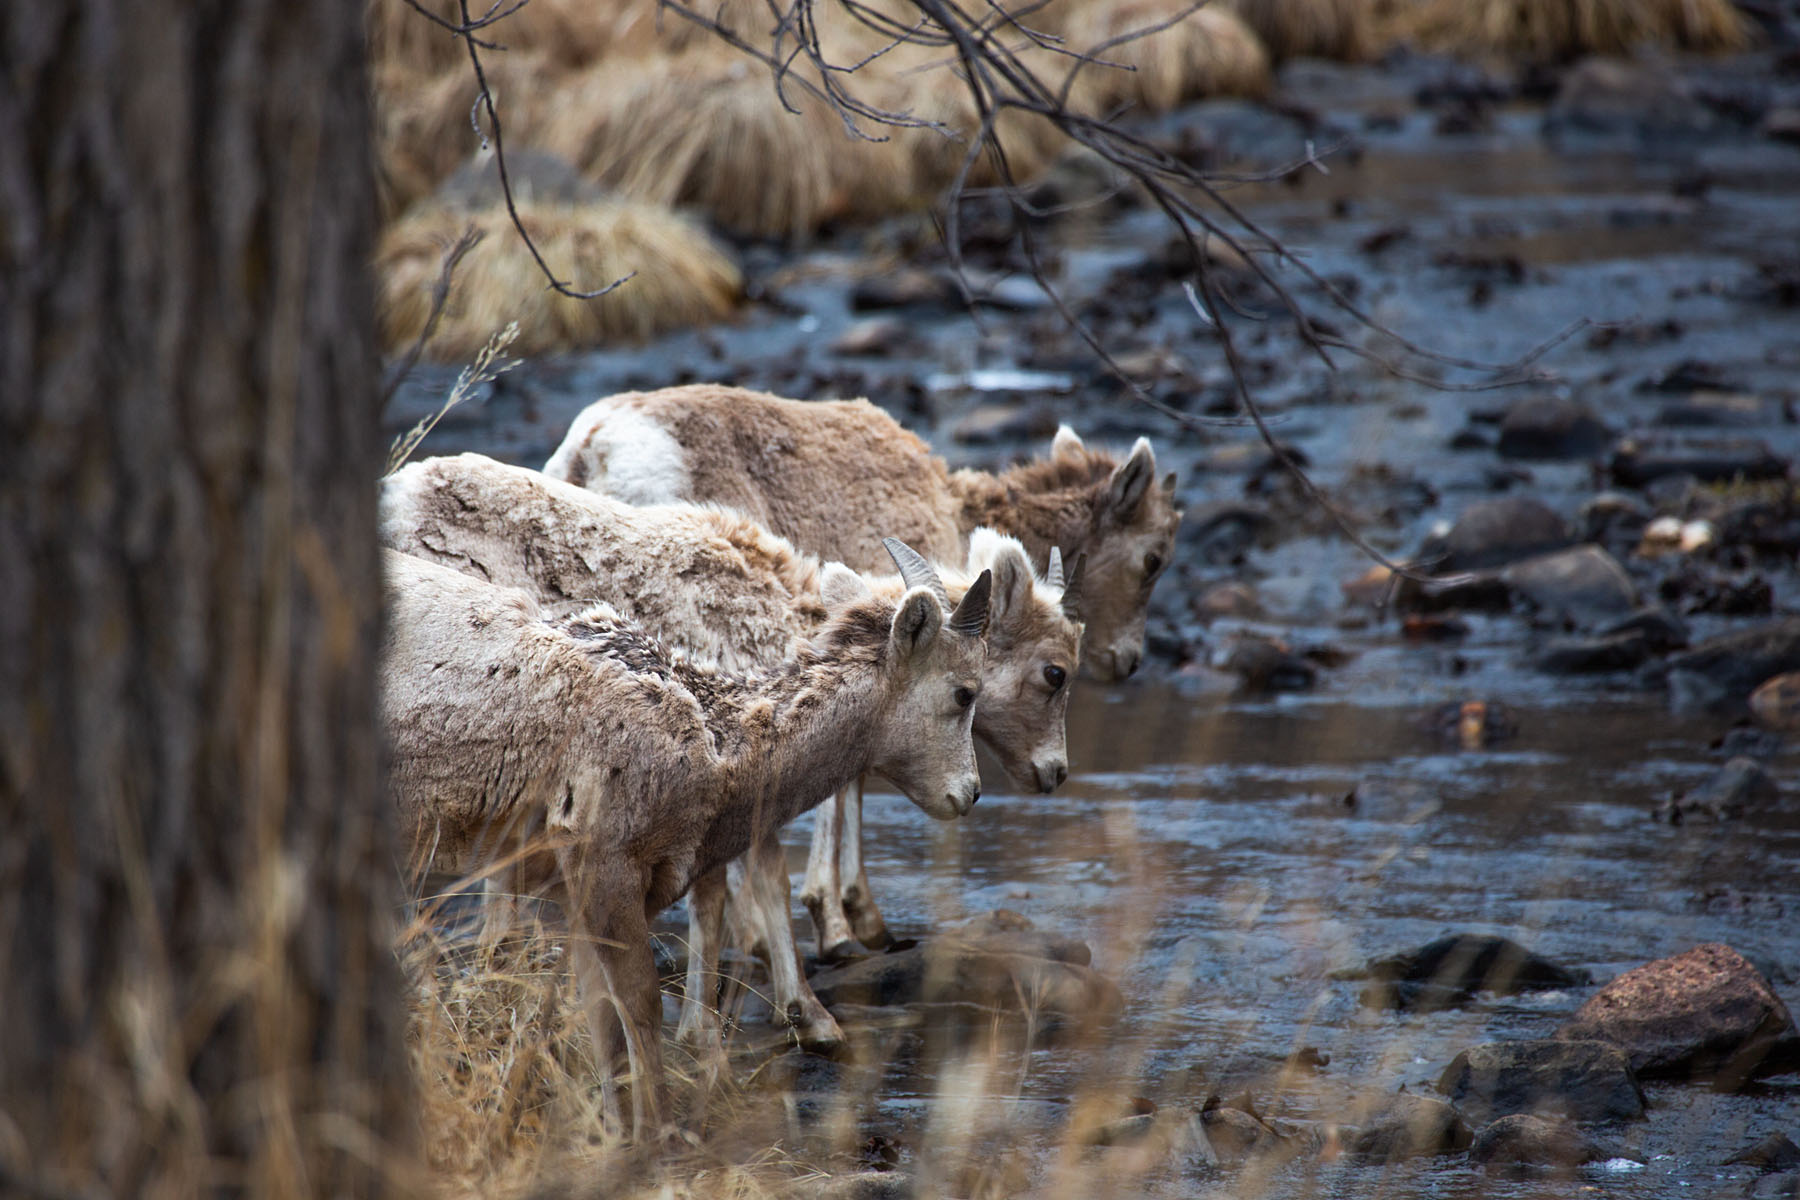 Bighorn lambs trying to figure out how to cross a creek, Custer State Park.  Click for next photo.